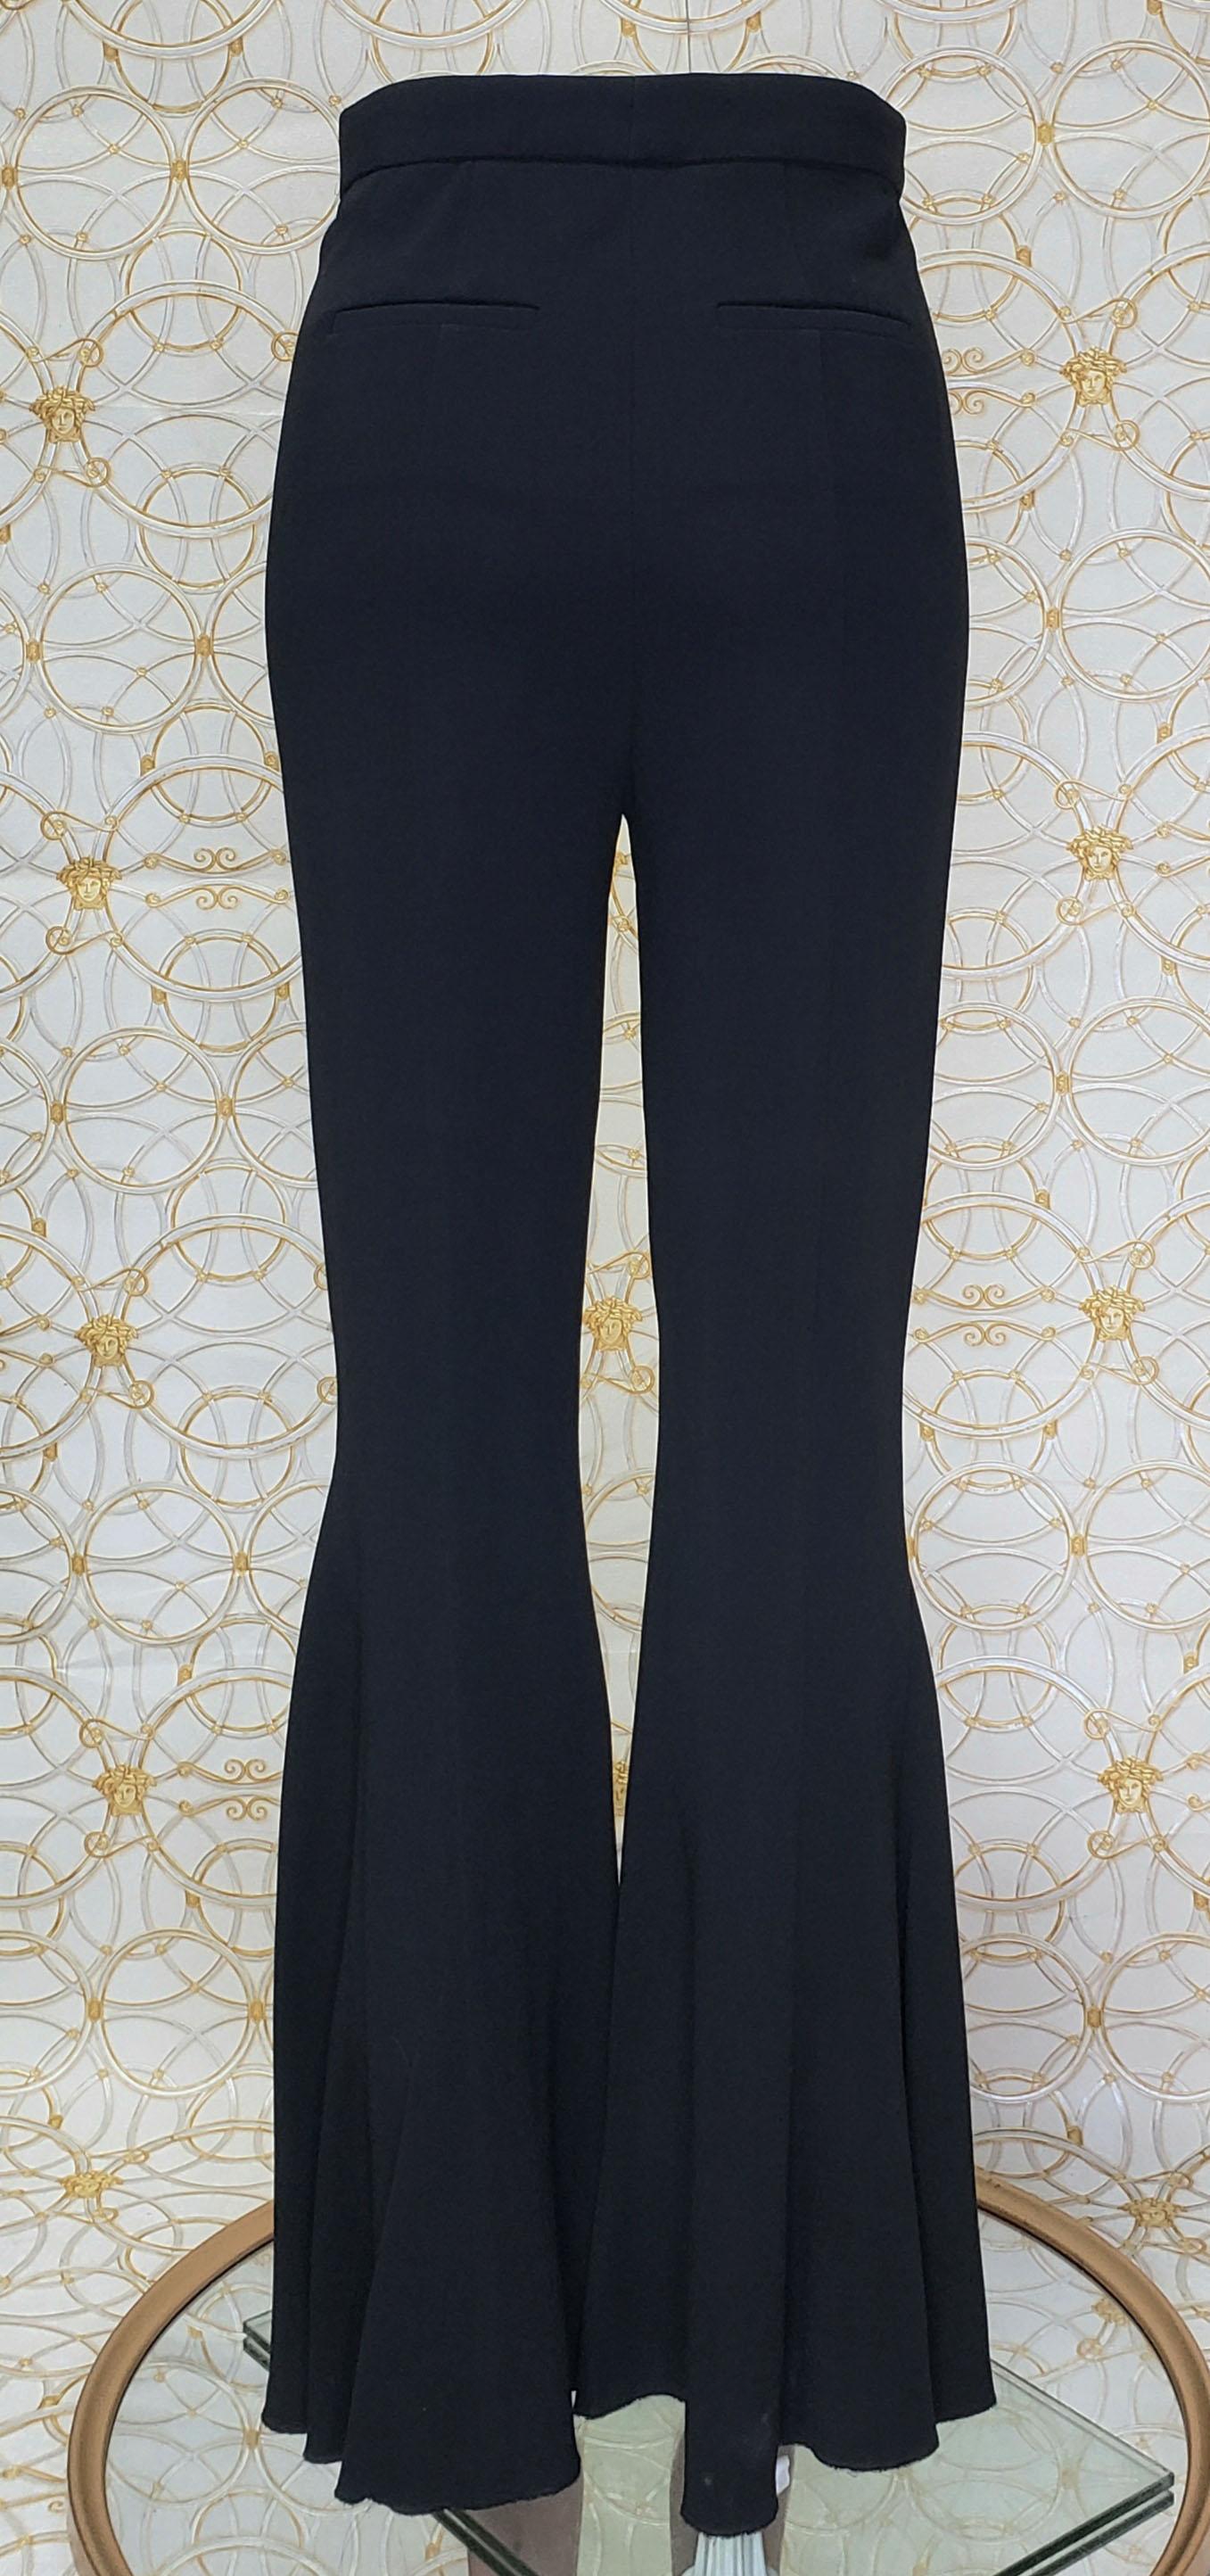 Black F/W 2015 Look # 13 VERSACE BLACK FLARED PANTS size 38 - 4 For Sale